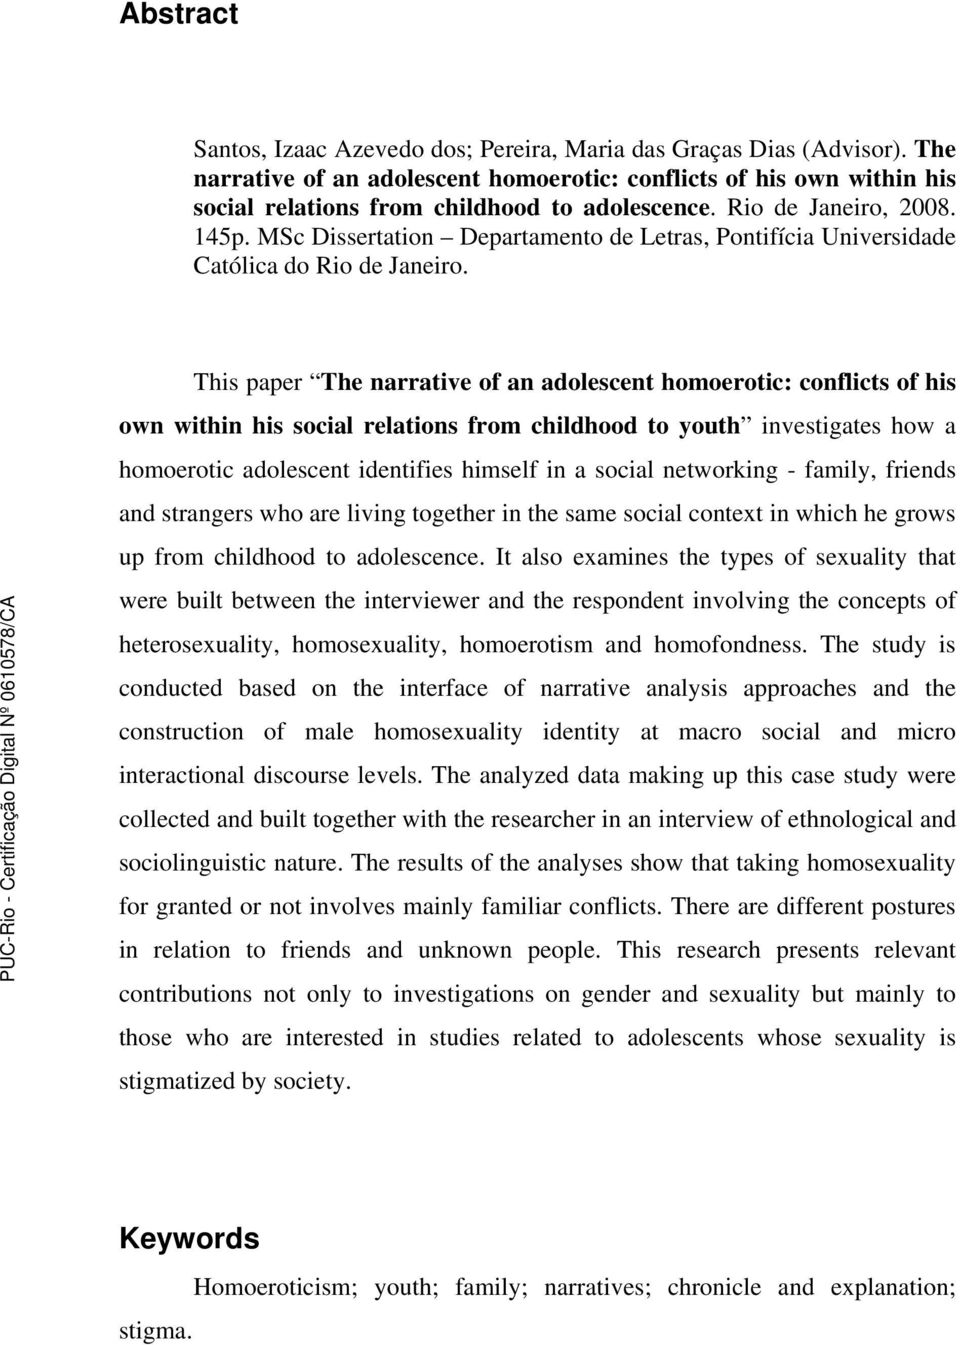 This paper The narrative of an adolescent homoerotic: conflicts of his own within his social relations from childhood to youth investigates how a homoerotic adolescent identifies himself in a social